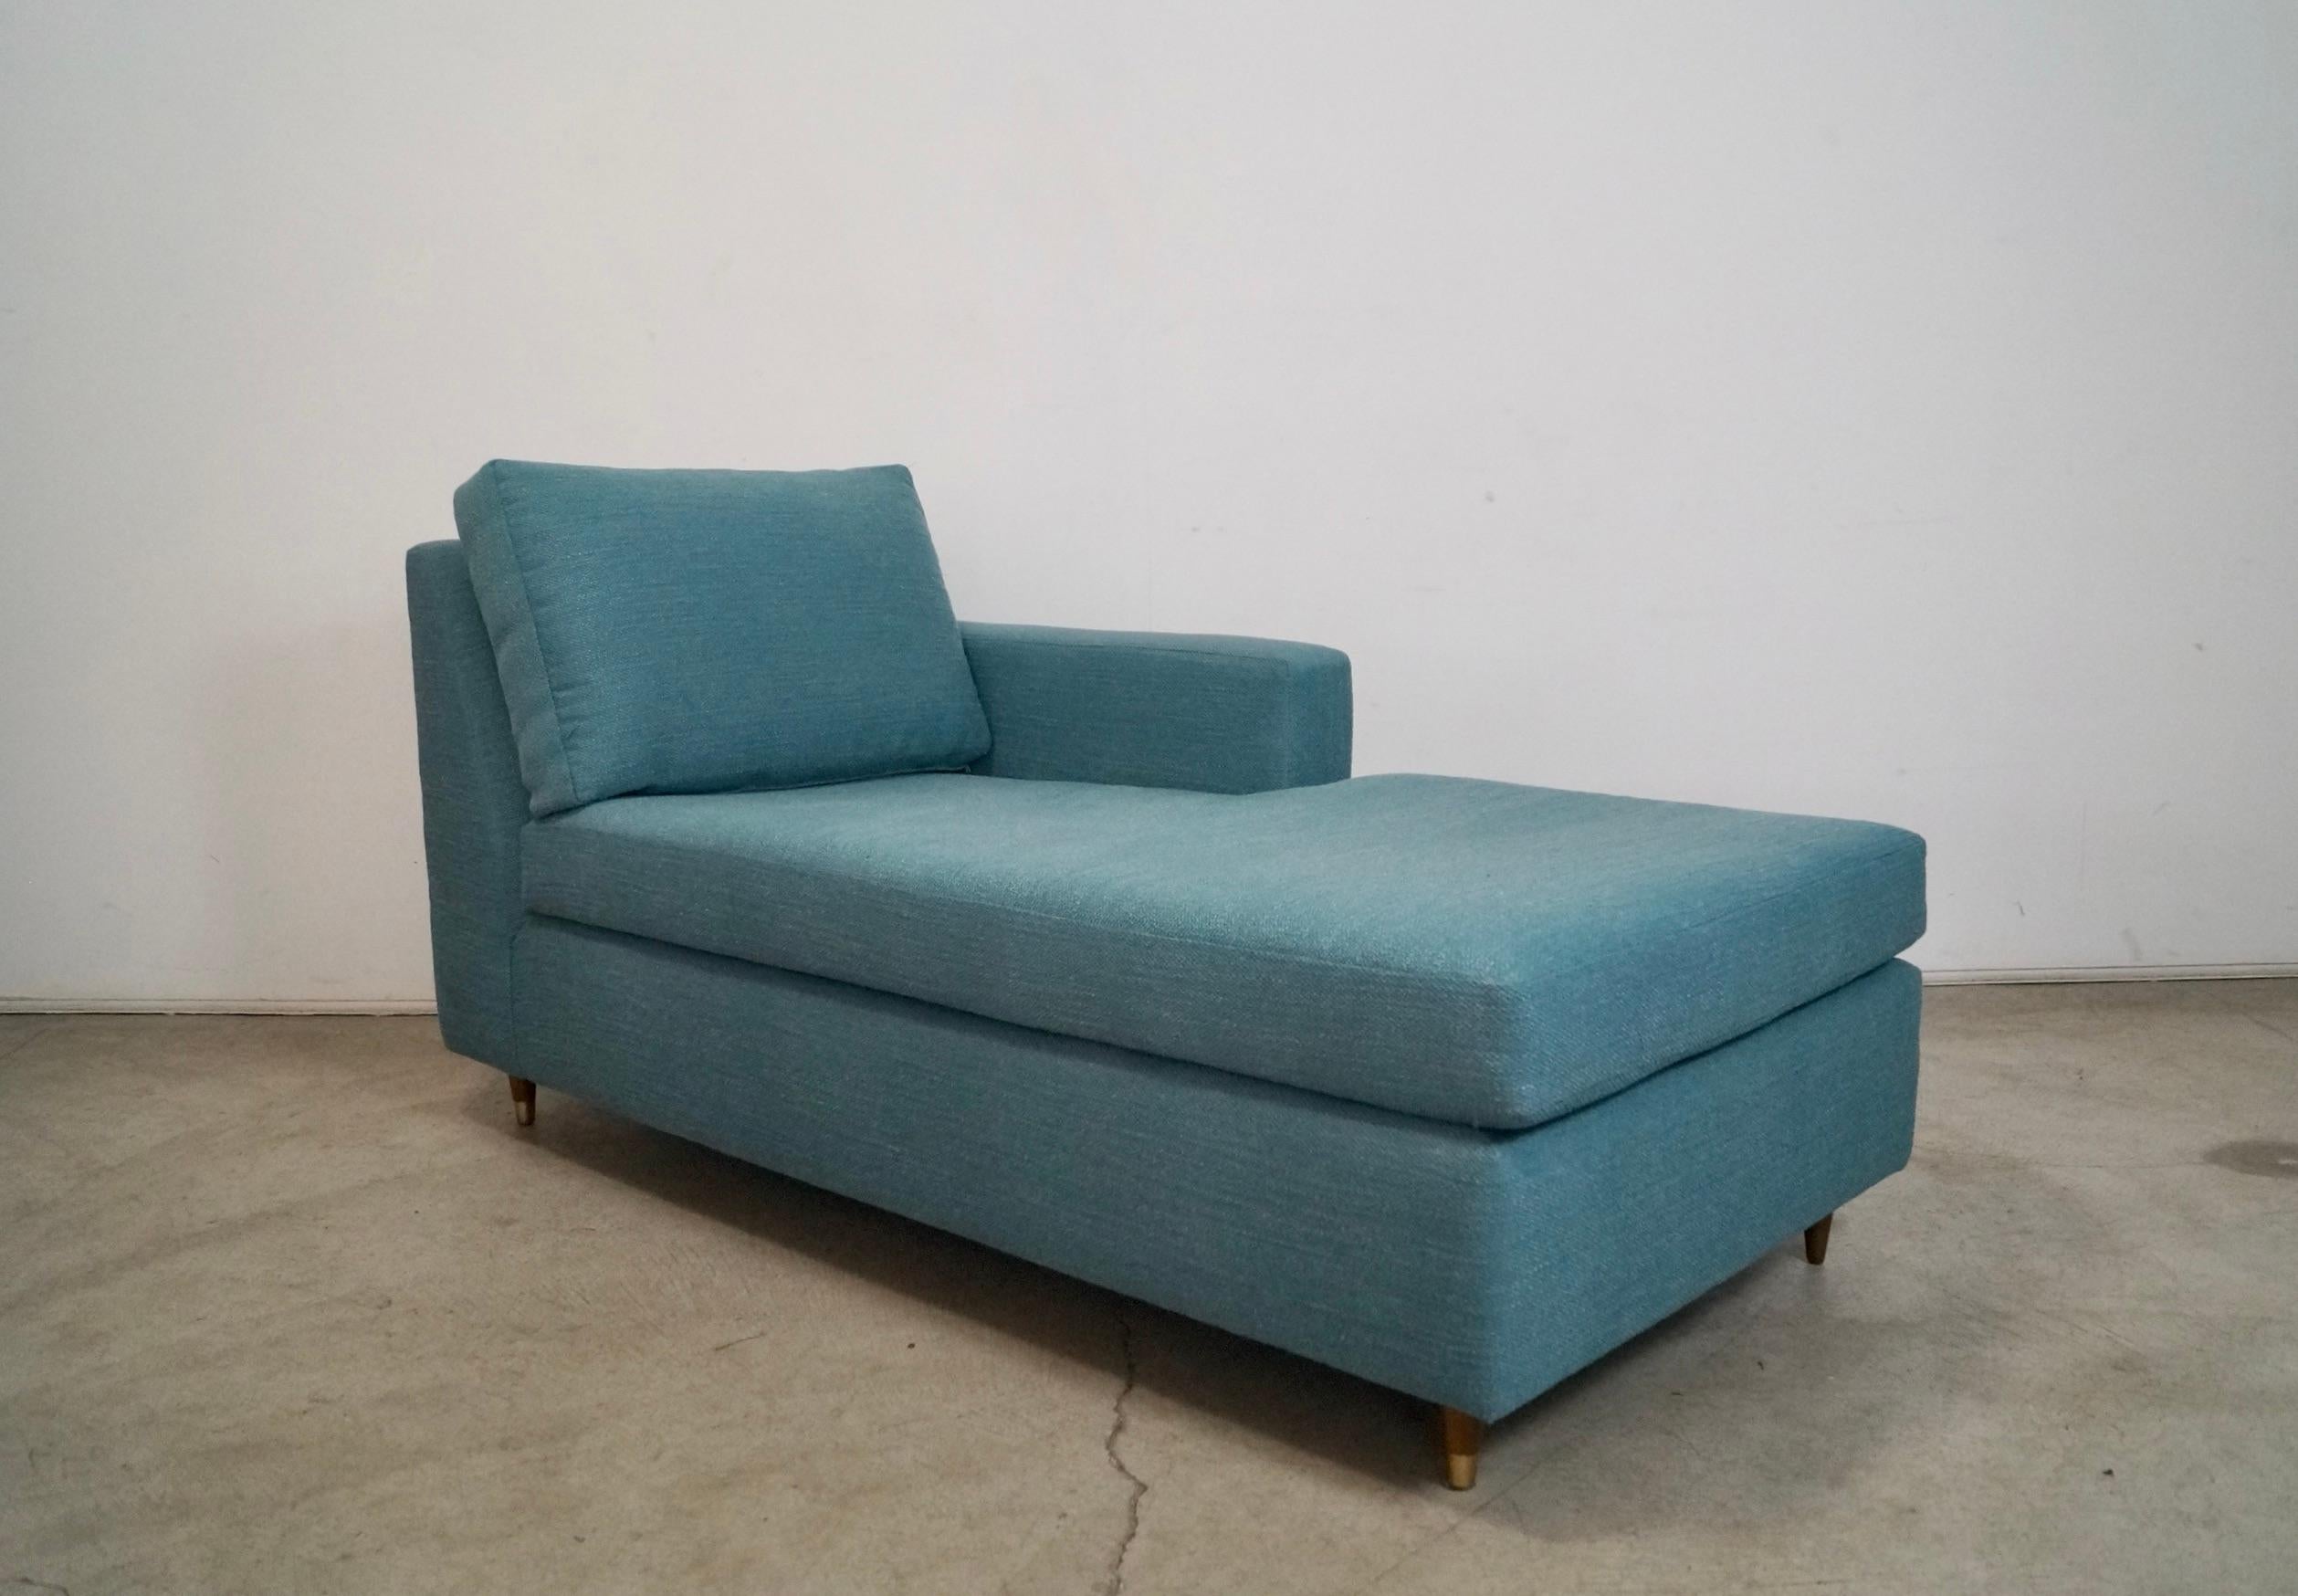 1970's Mid-Century Modern Single Arm Reupholstered Chaise Lounge Daybed For Sale 7